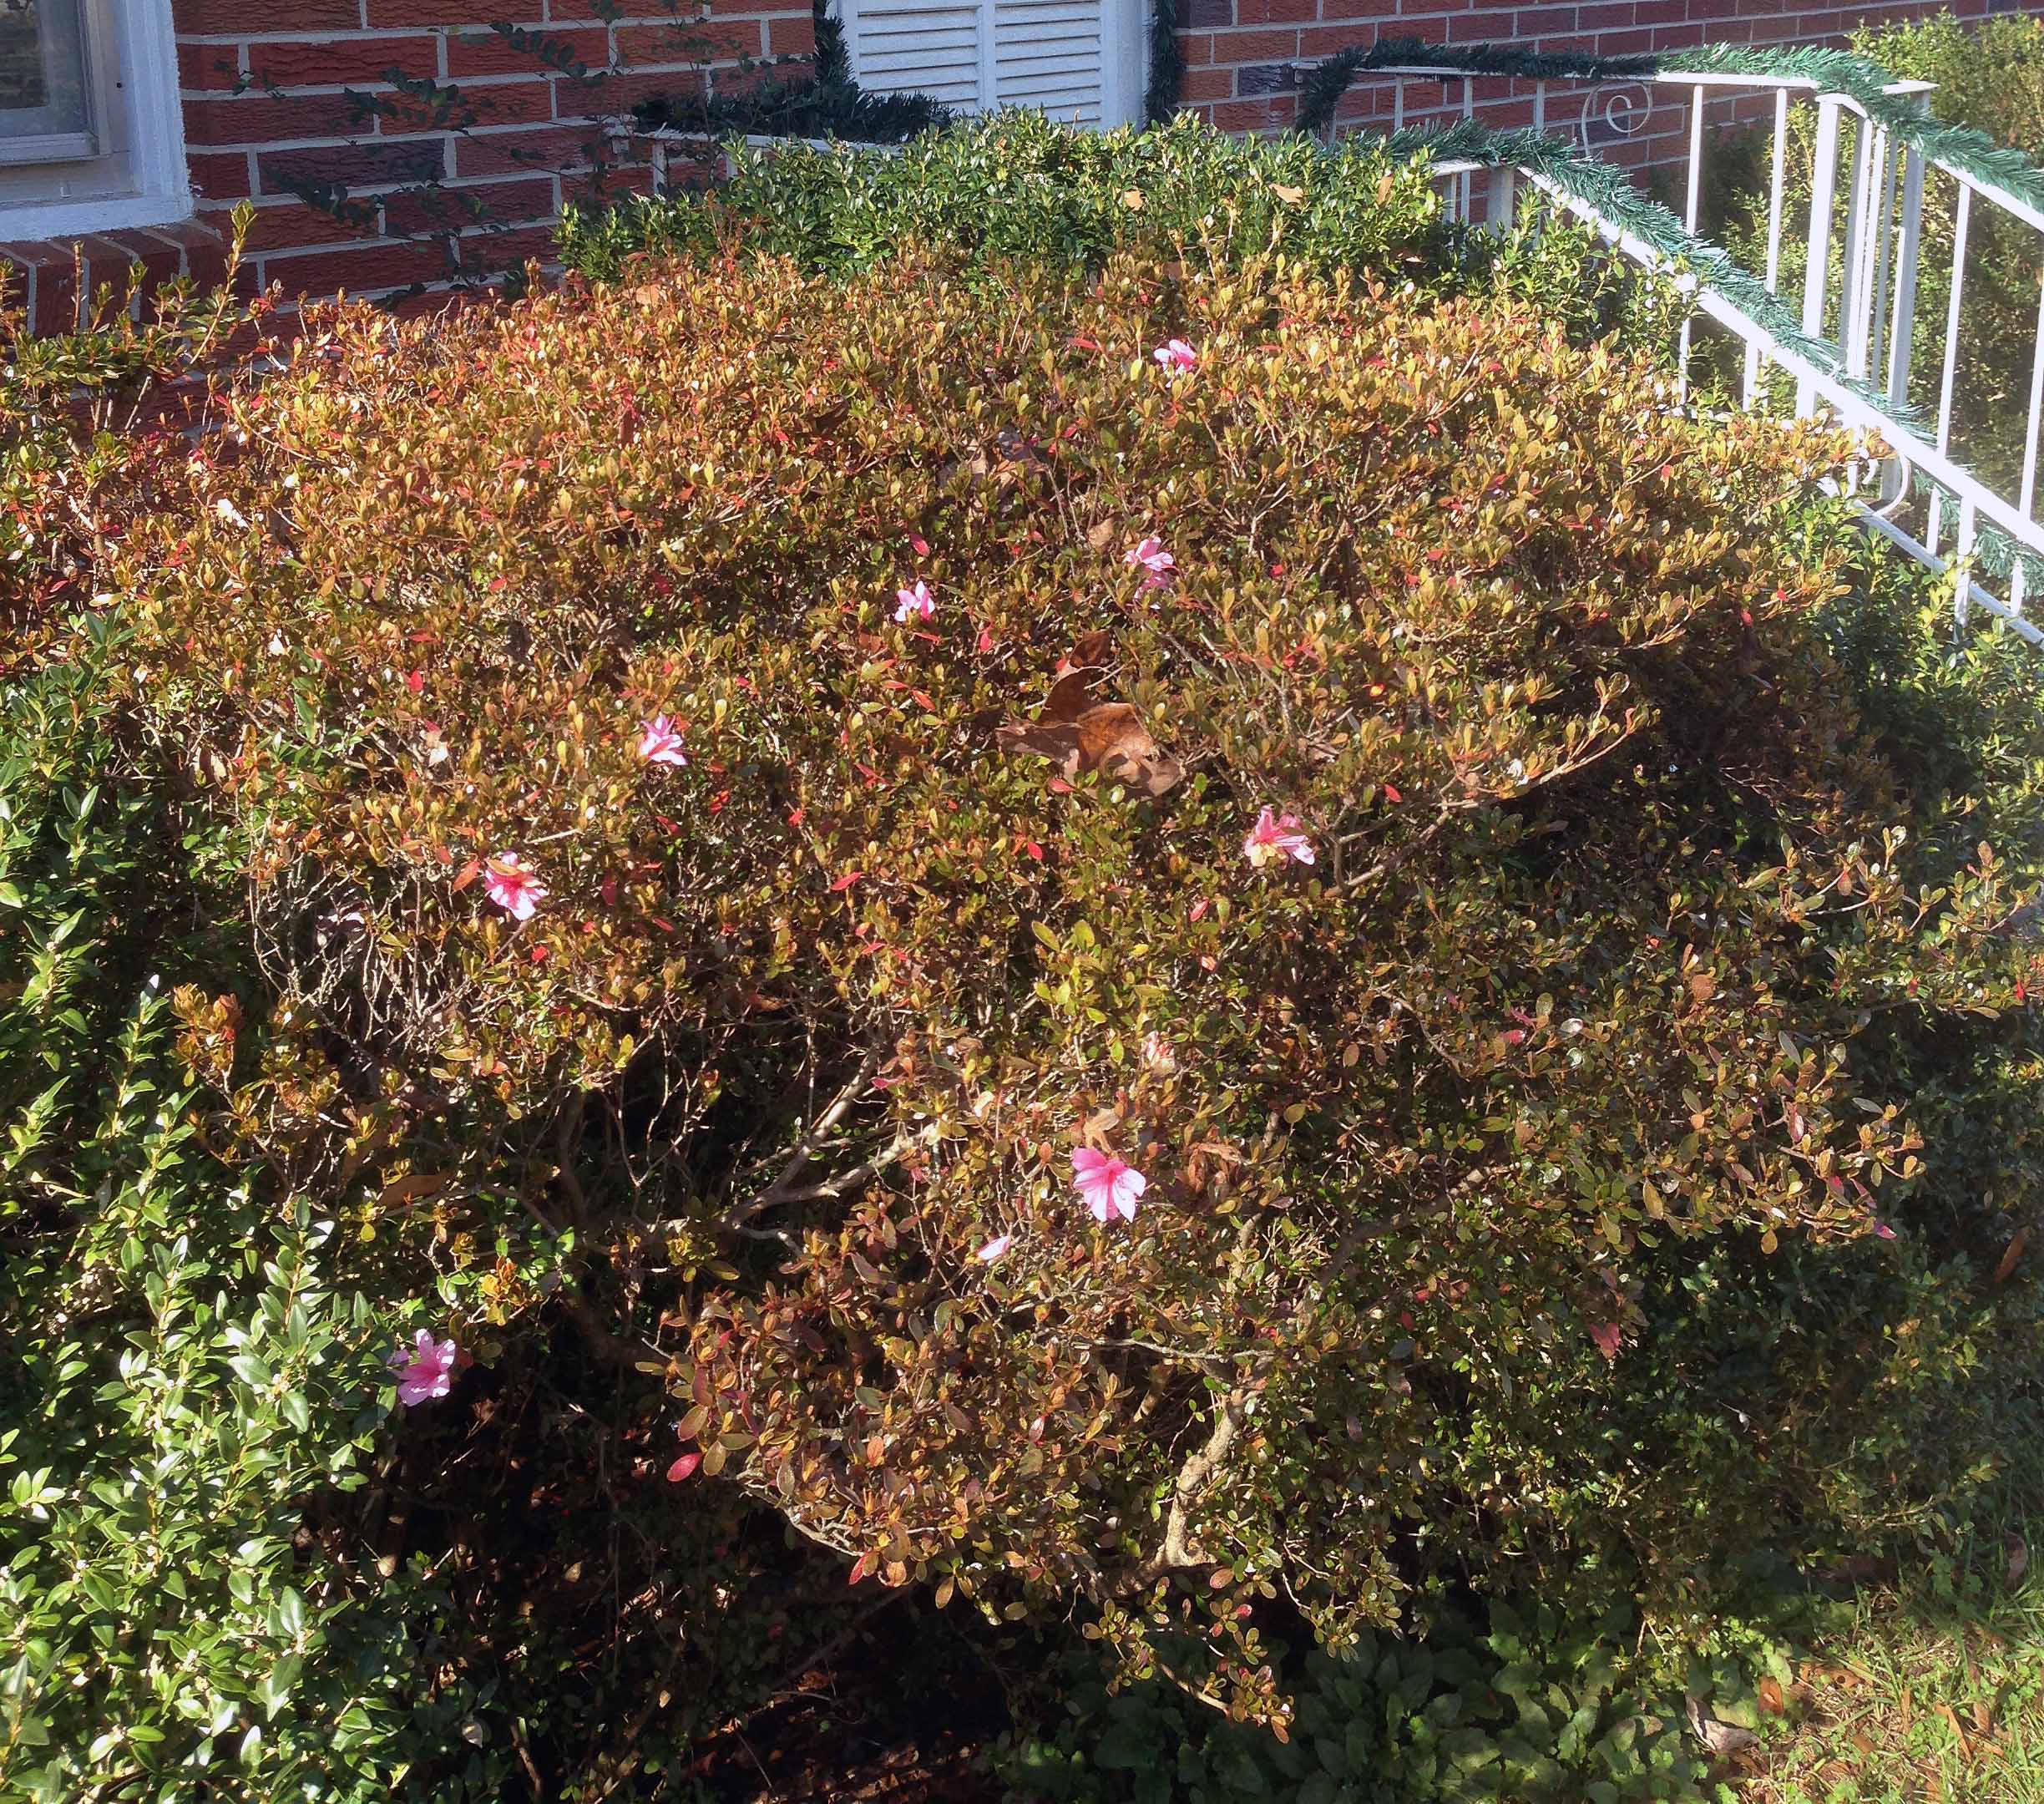 Springlike weather throughout the state cause ornamental shrubs and trees to bloom early. These azaleas blossomed the week before Christmas in Hart County.